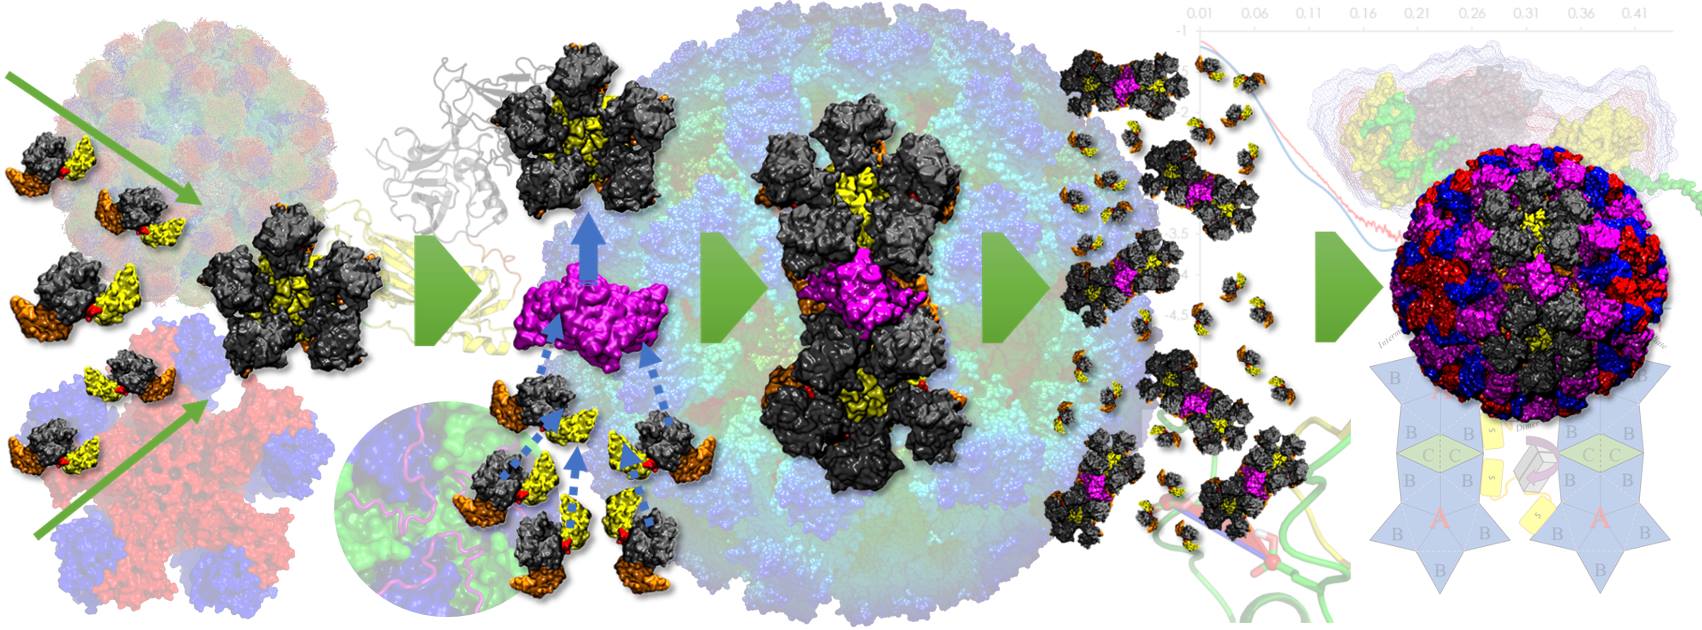 Norovirus capsid assembly hypothesis